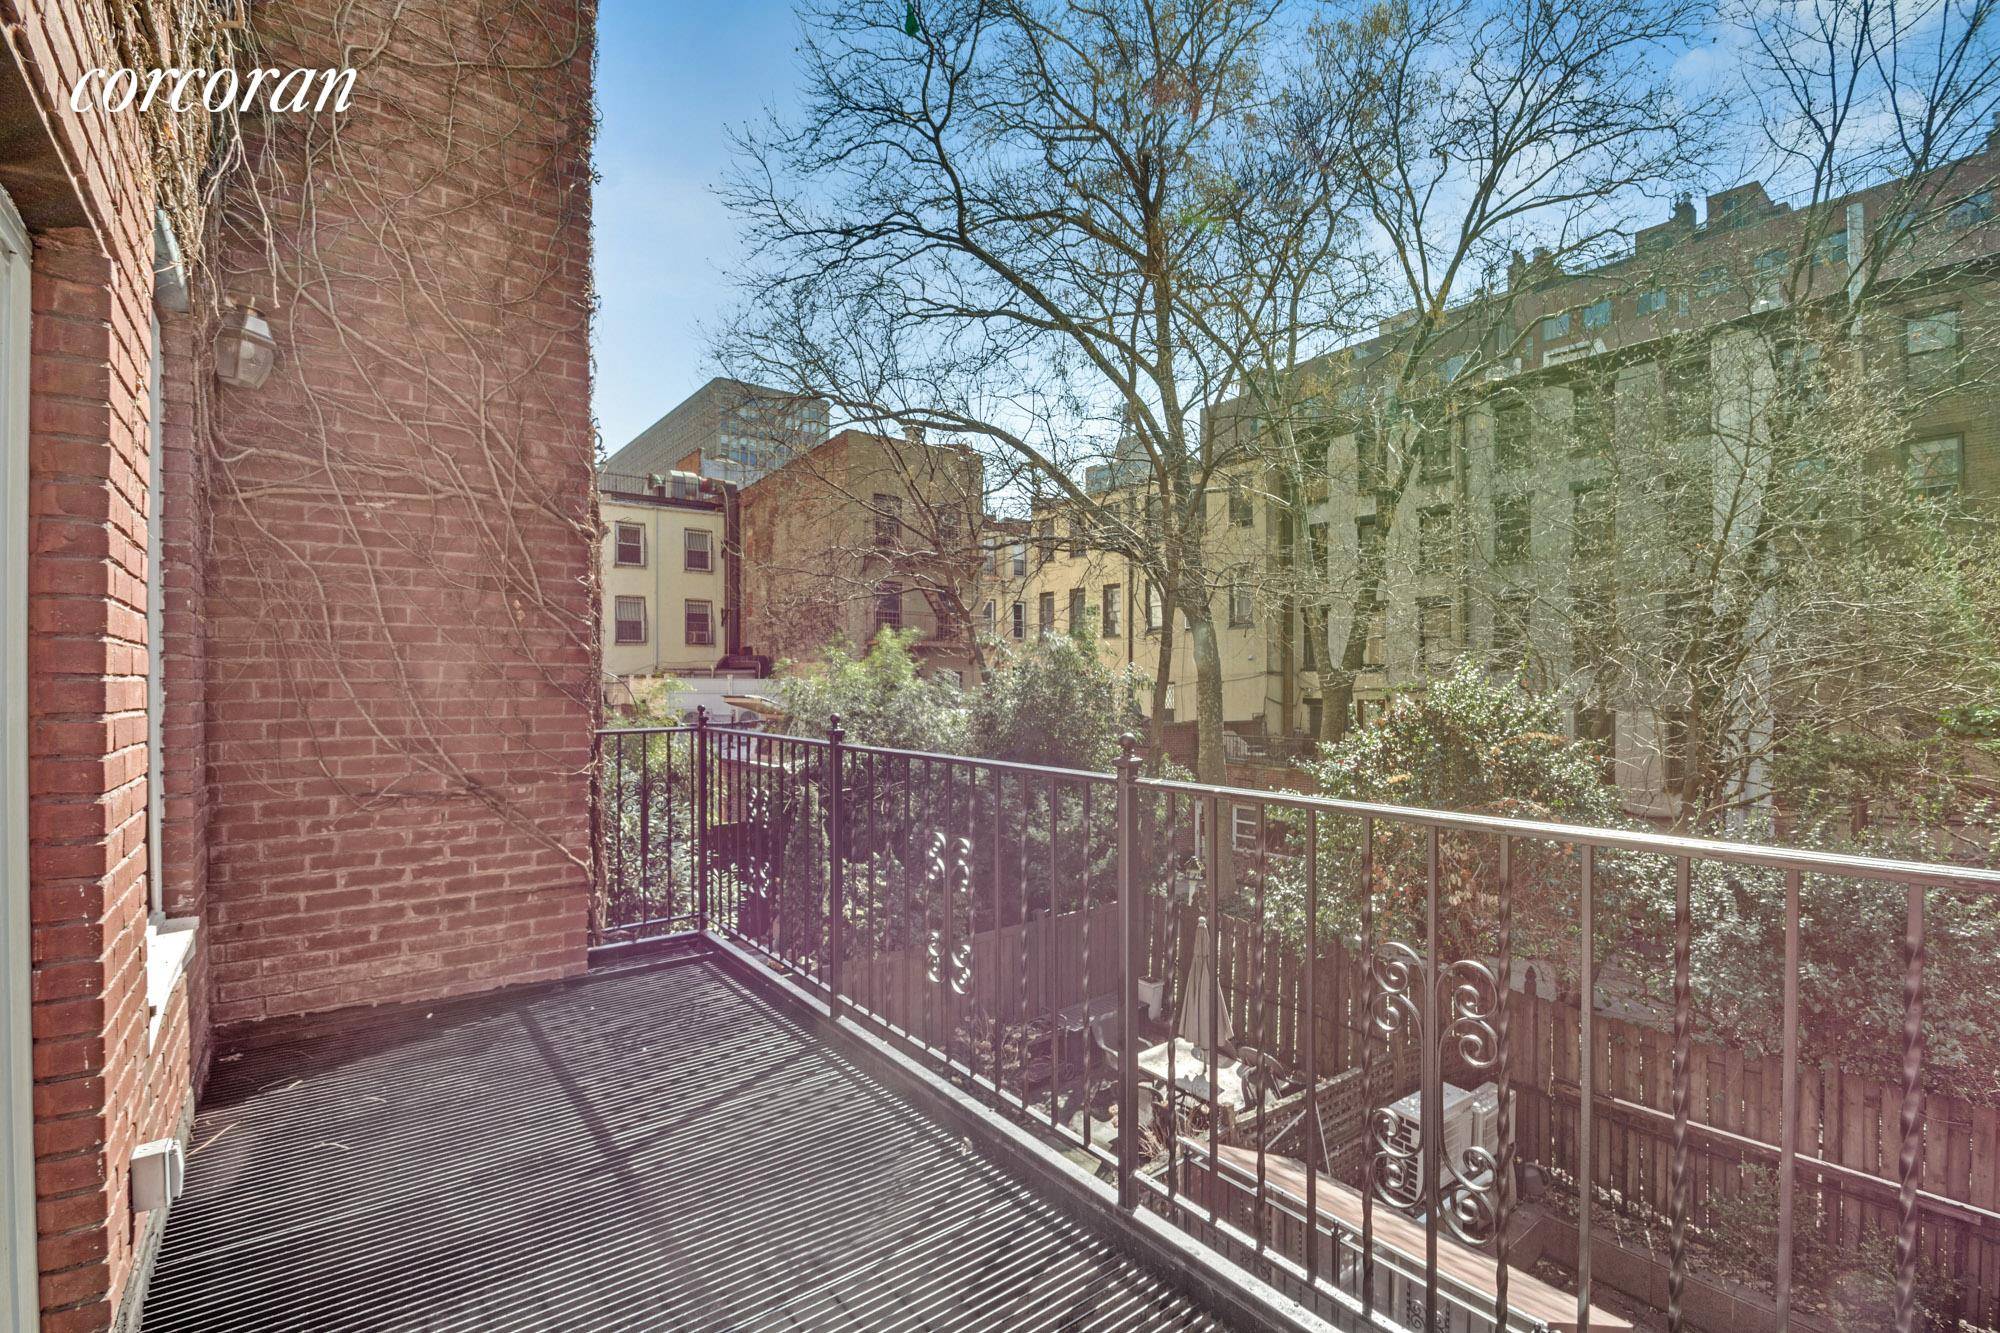 Spanning 2 floors plus THREE LEVELS OF PRIVATE OUTDOOR SPACE, this opulent Kips Bay 2 bed, 2 bath DUPLEX features central air and top tier renovations as well as ornate ...